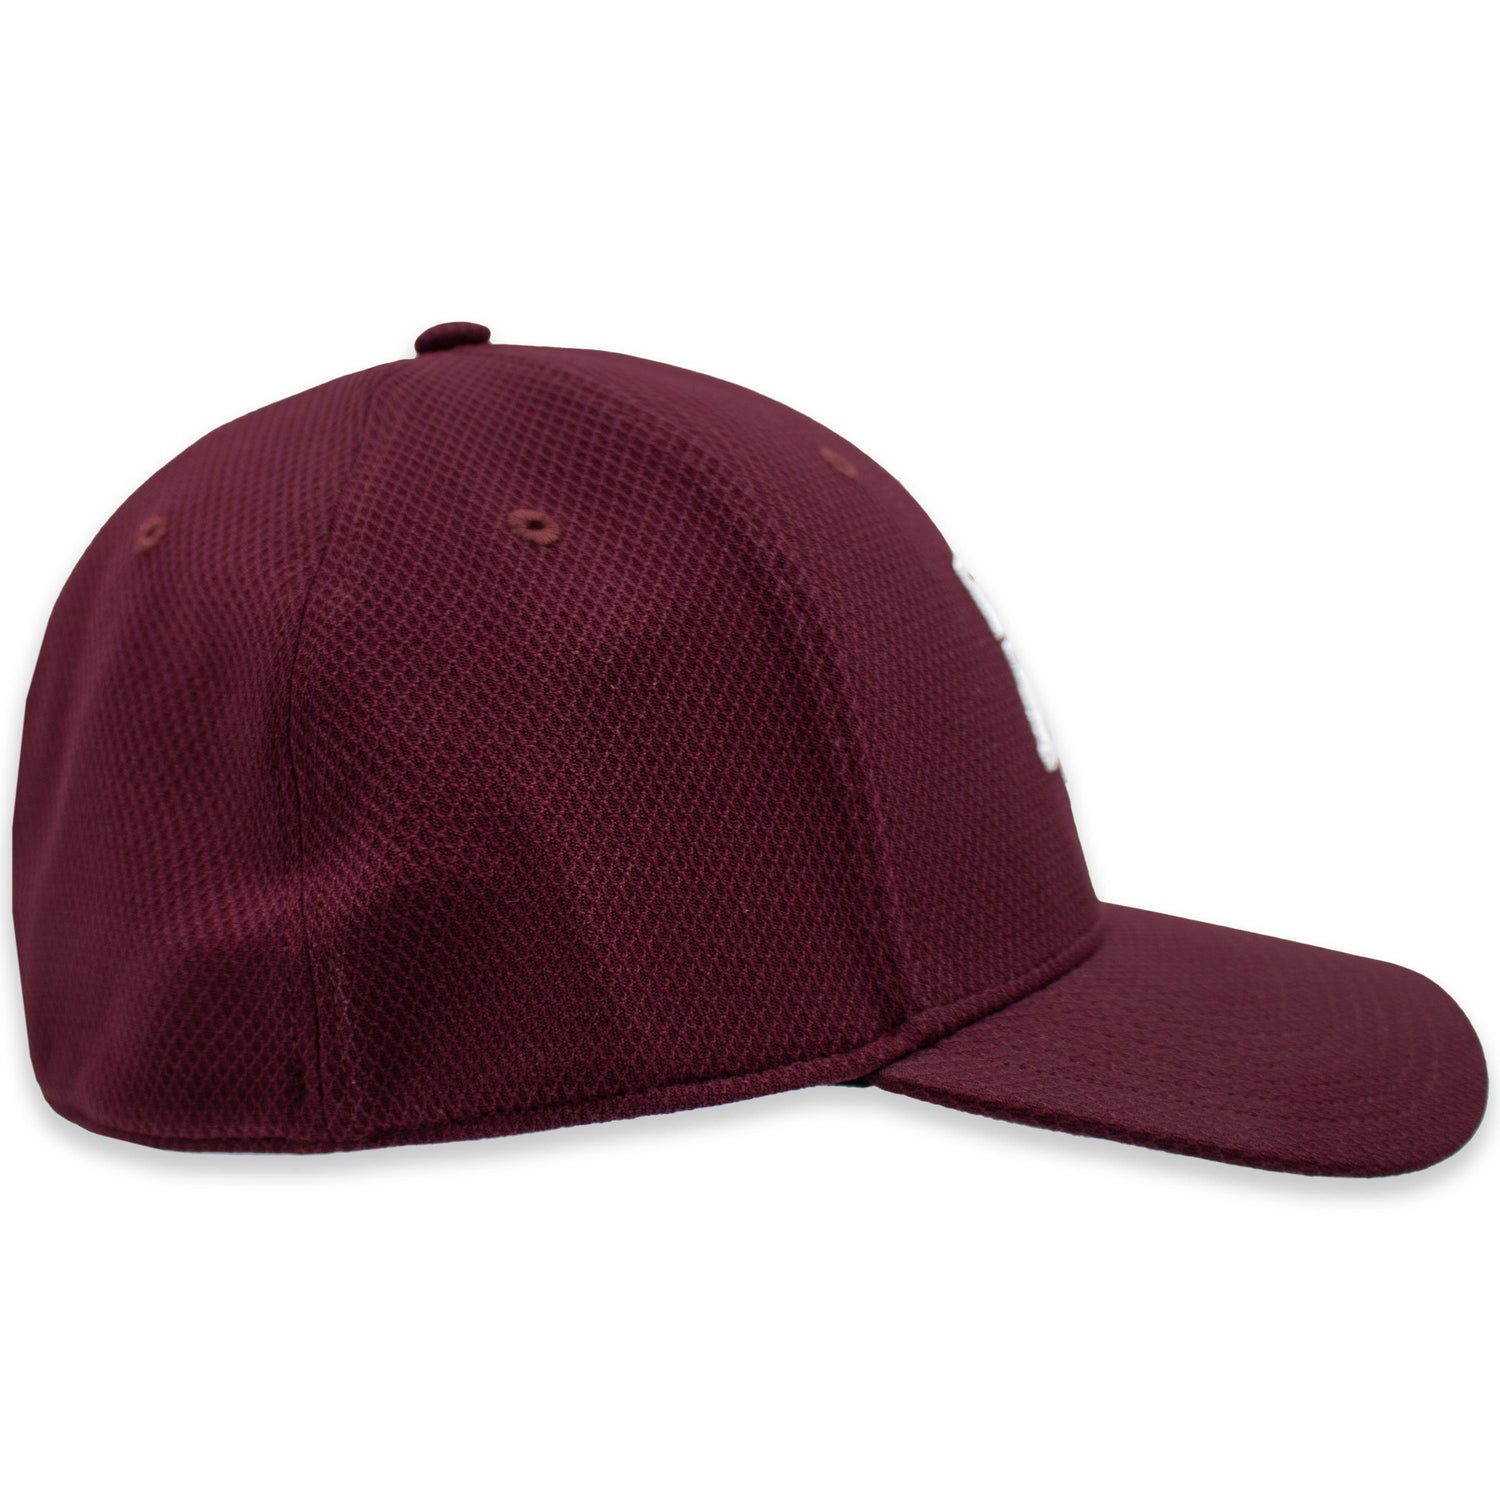 Texas A&M Adidas Coaches Structured Flex Fitted Hat